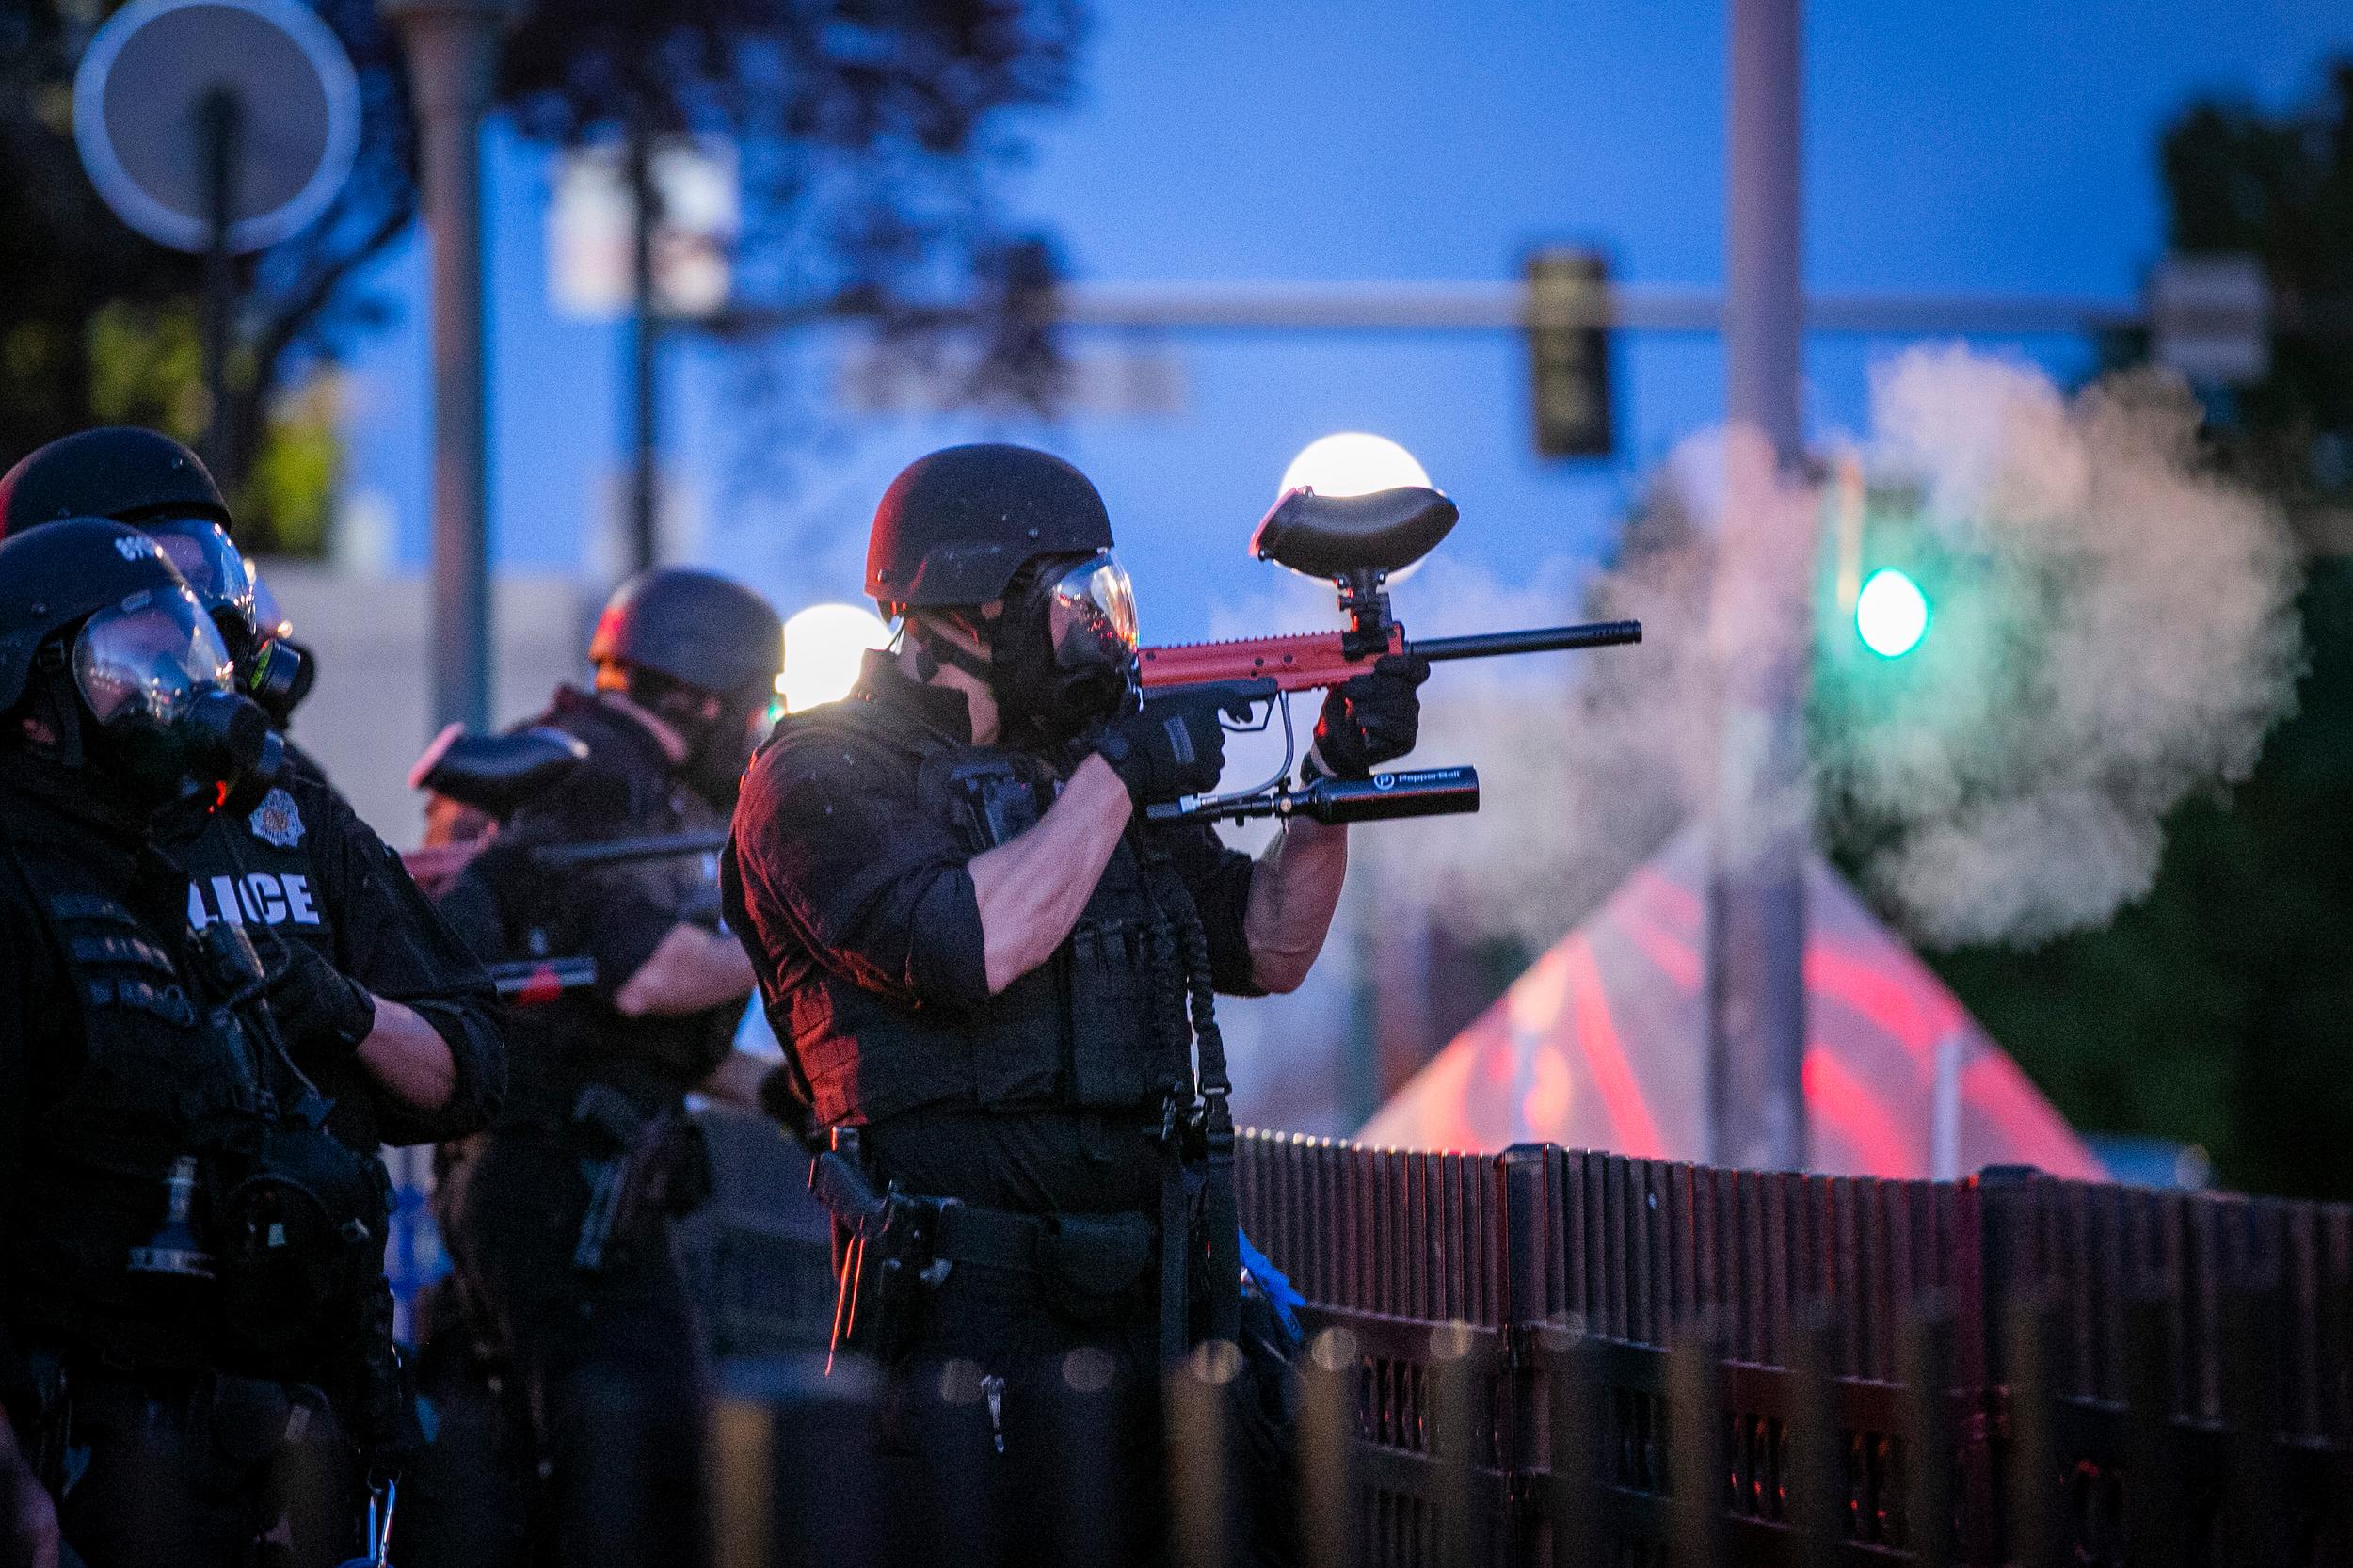 FLOYD-PROTEST-POLICE-FIRE-PROJECTILES